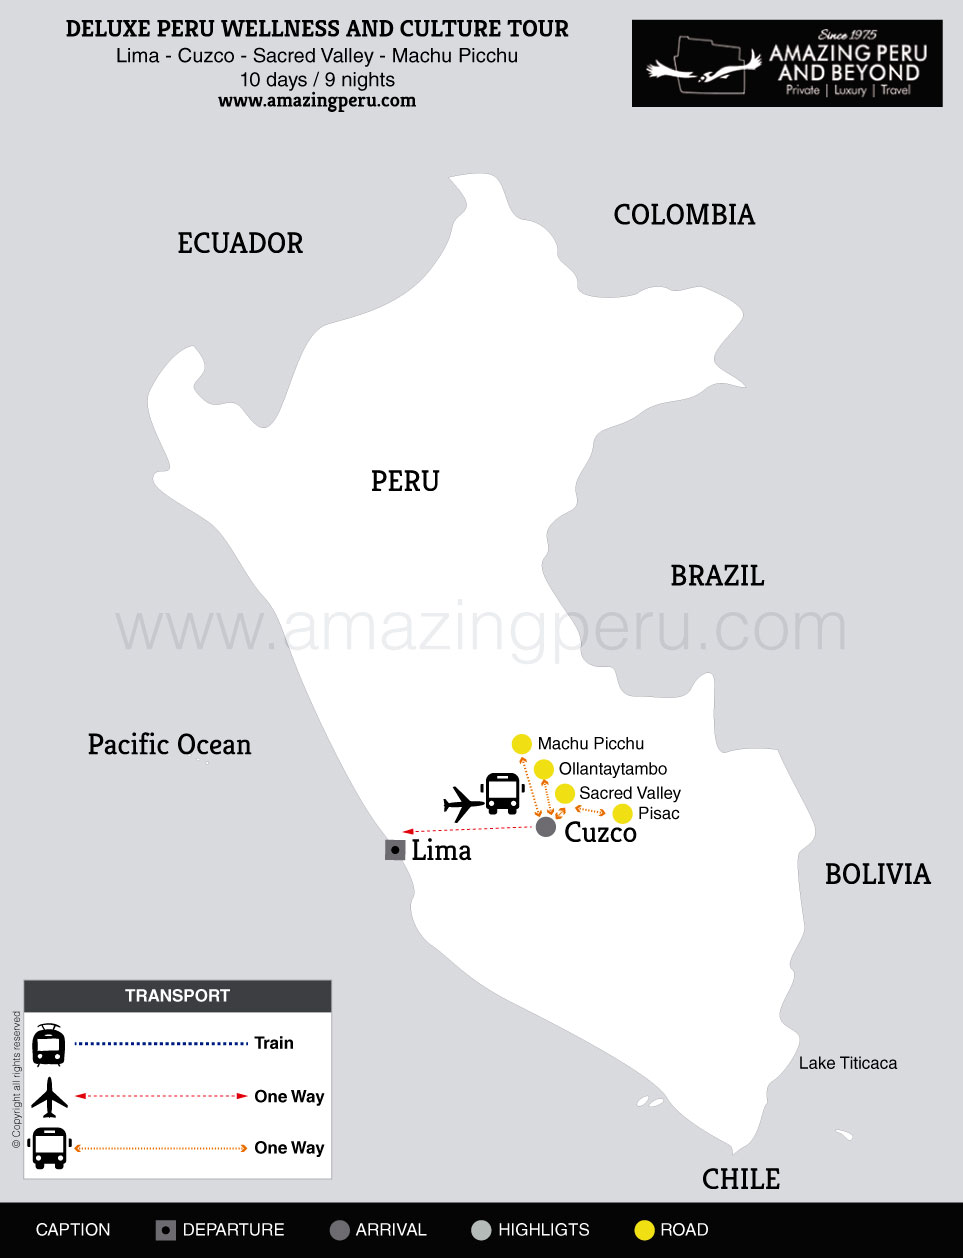 2023 Deluxe Peru Wellness and Culture Tour - 10 days / 9 nights.